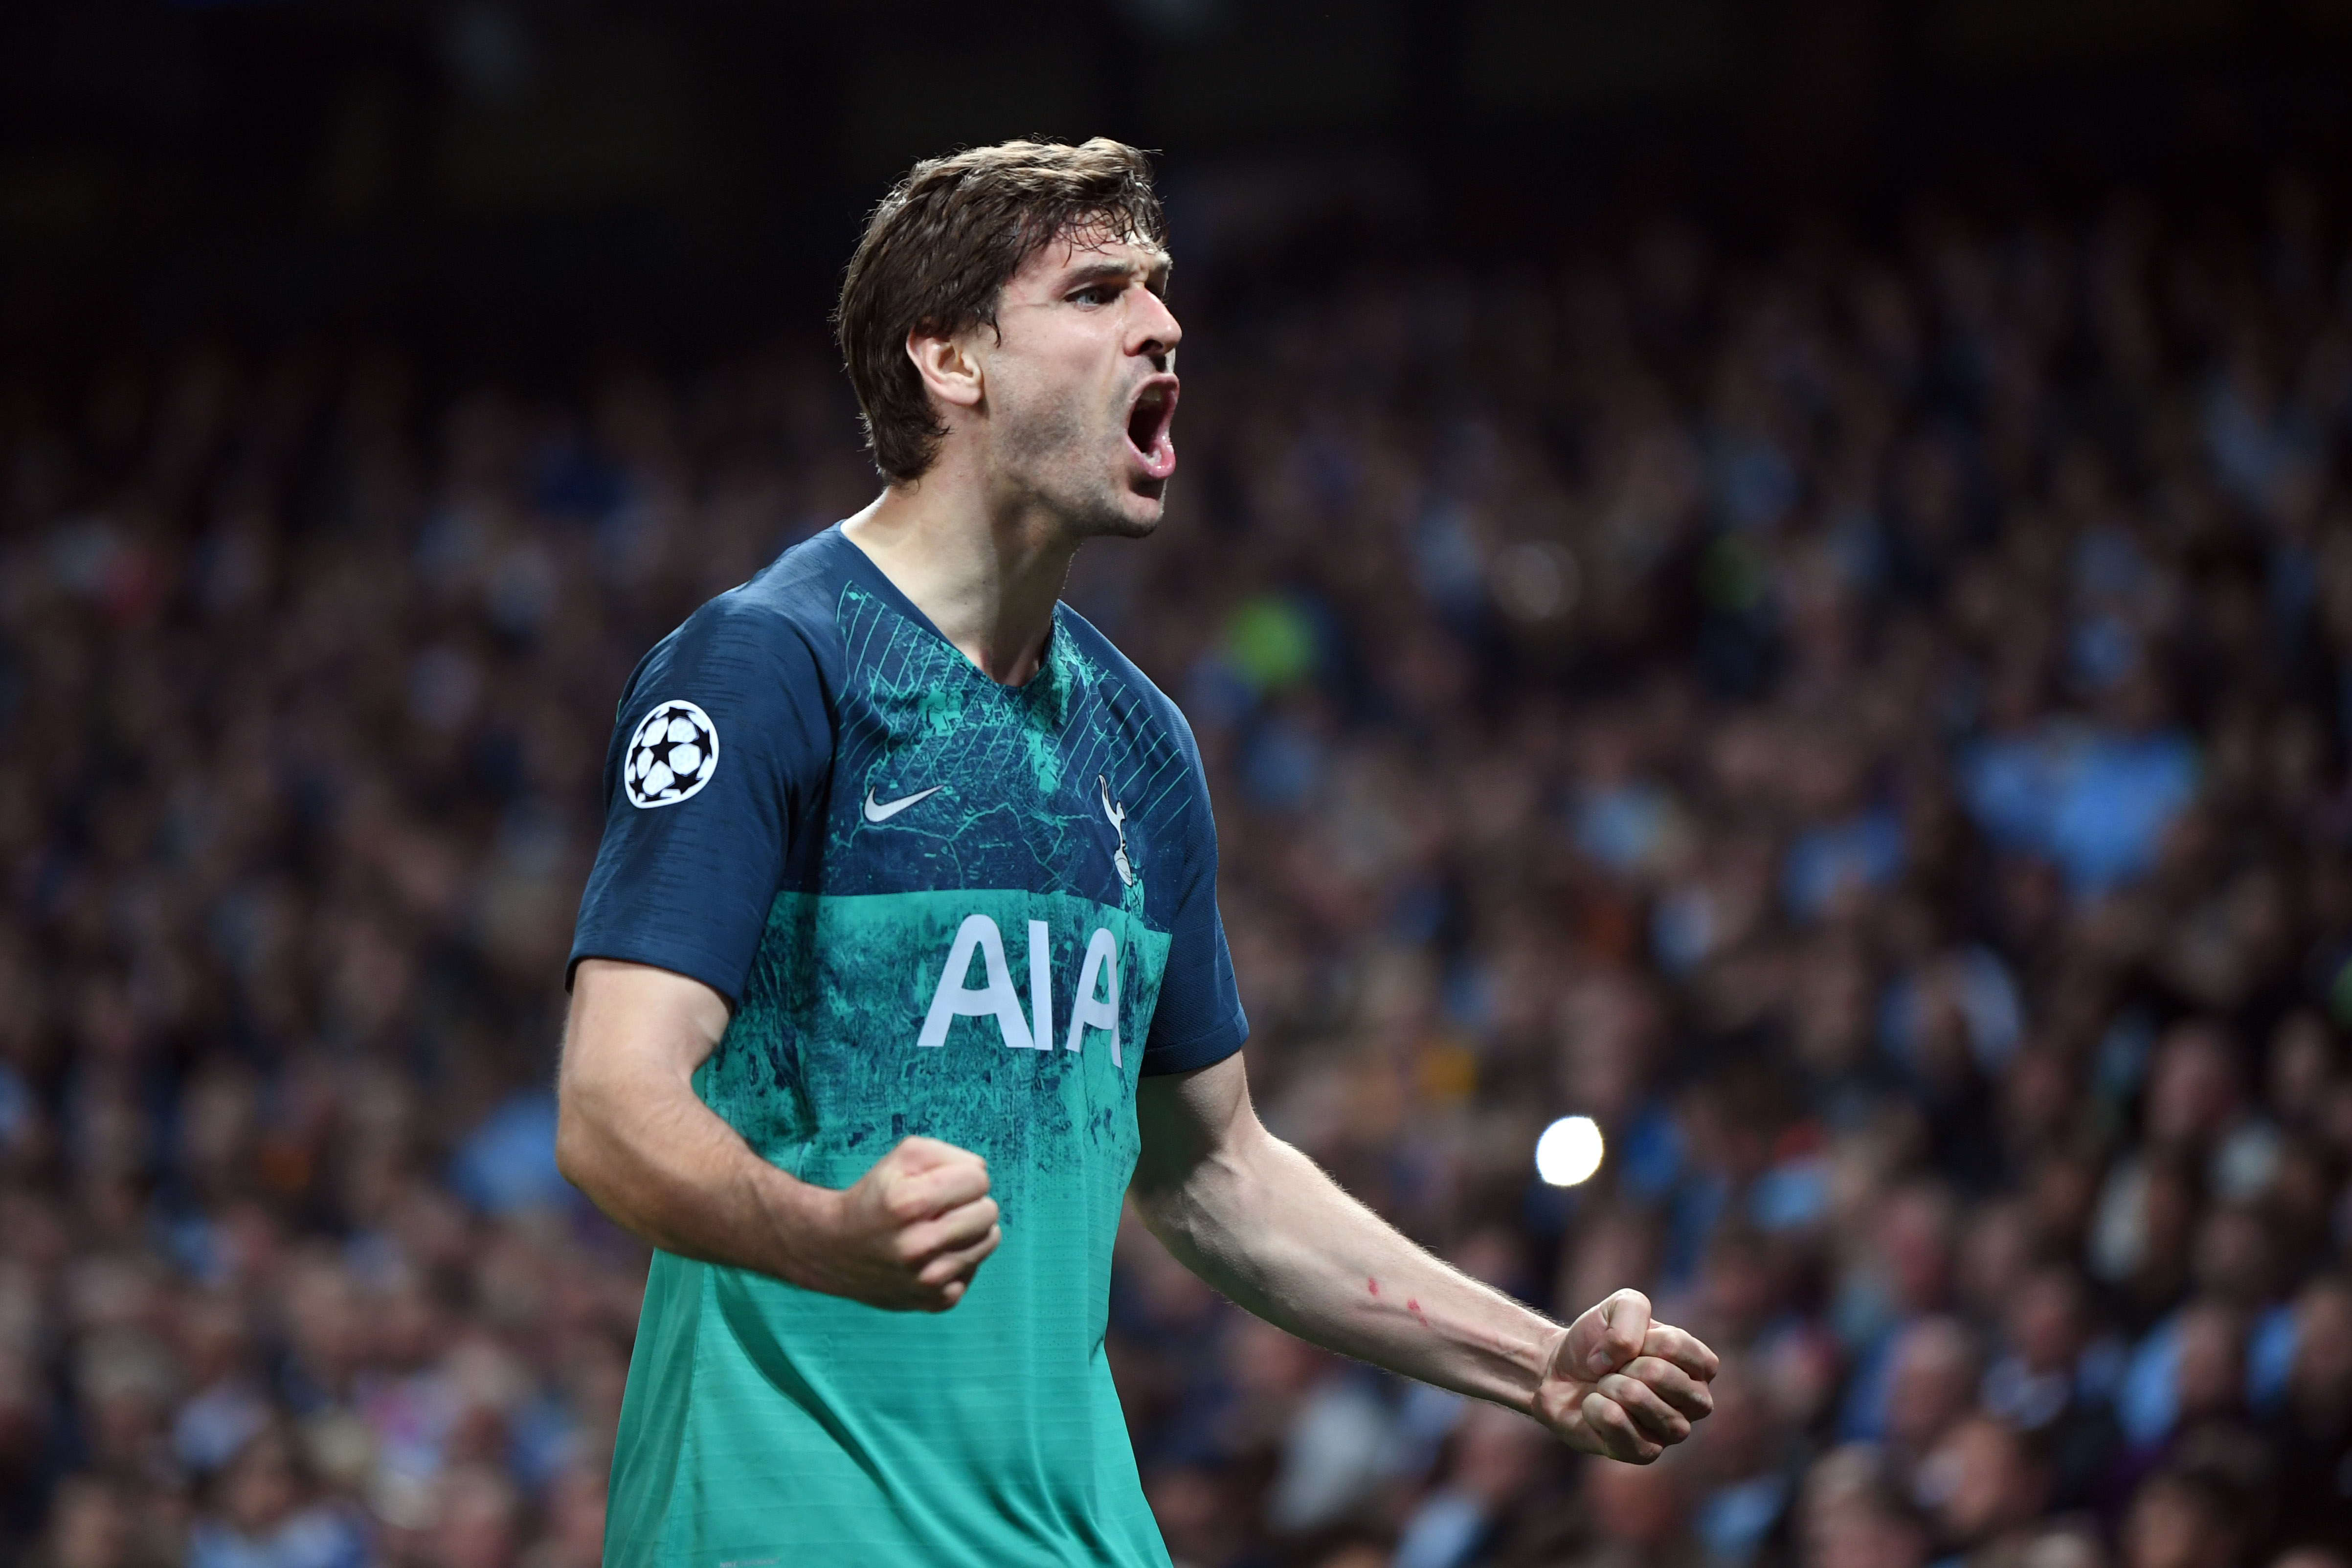 MANCHESTER, ENGLAND - APRIL 17:  Fernando Llorente of Tottenham Hotspur celebrates after scoring his team's third goal during the UEFA Champions League Quarter Final second leg match between Manchester City and Tottenham Hotspur at at Etihad Stadium on April 17, 2019 in Manchester, England. (Photo by Laurence Griffiths/Getty Images)